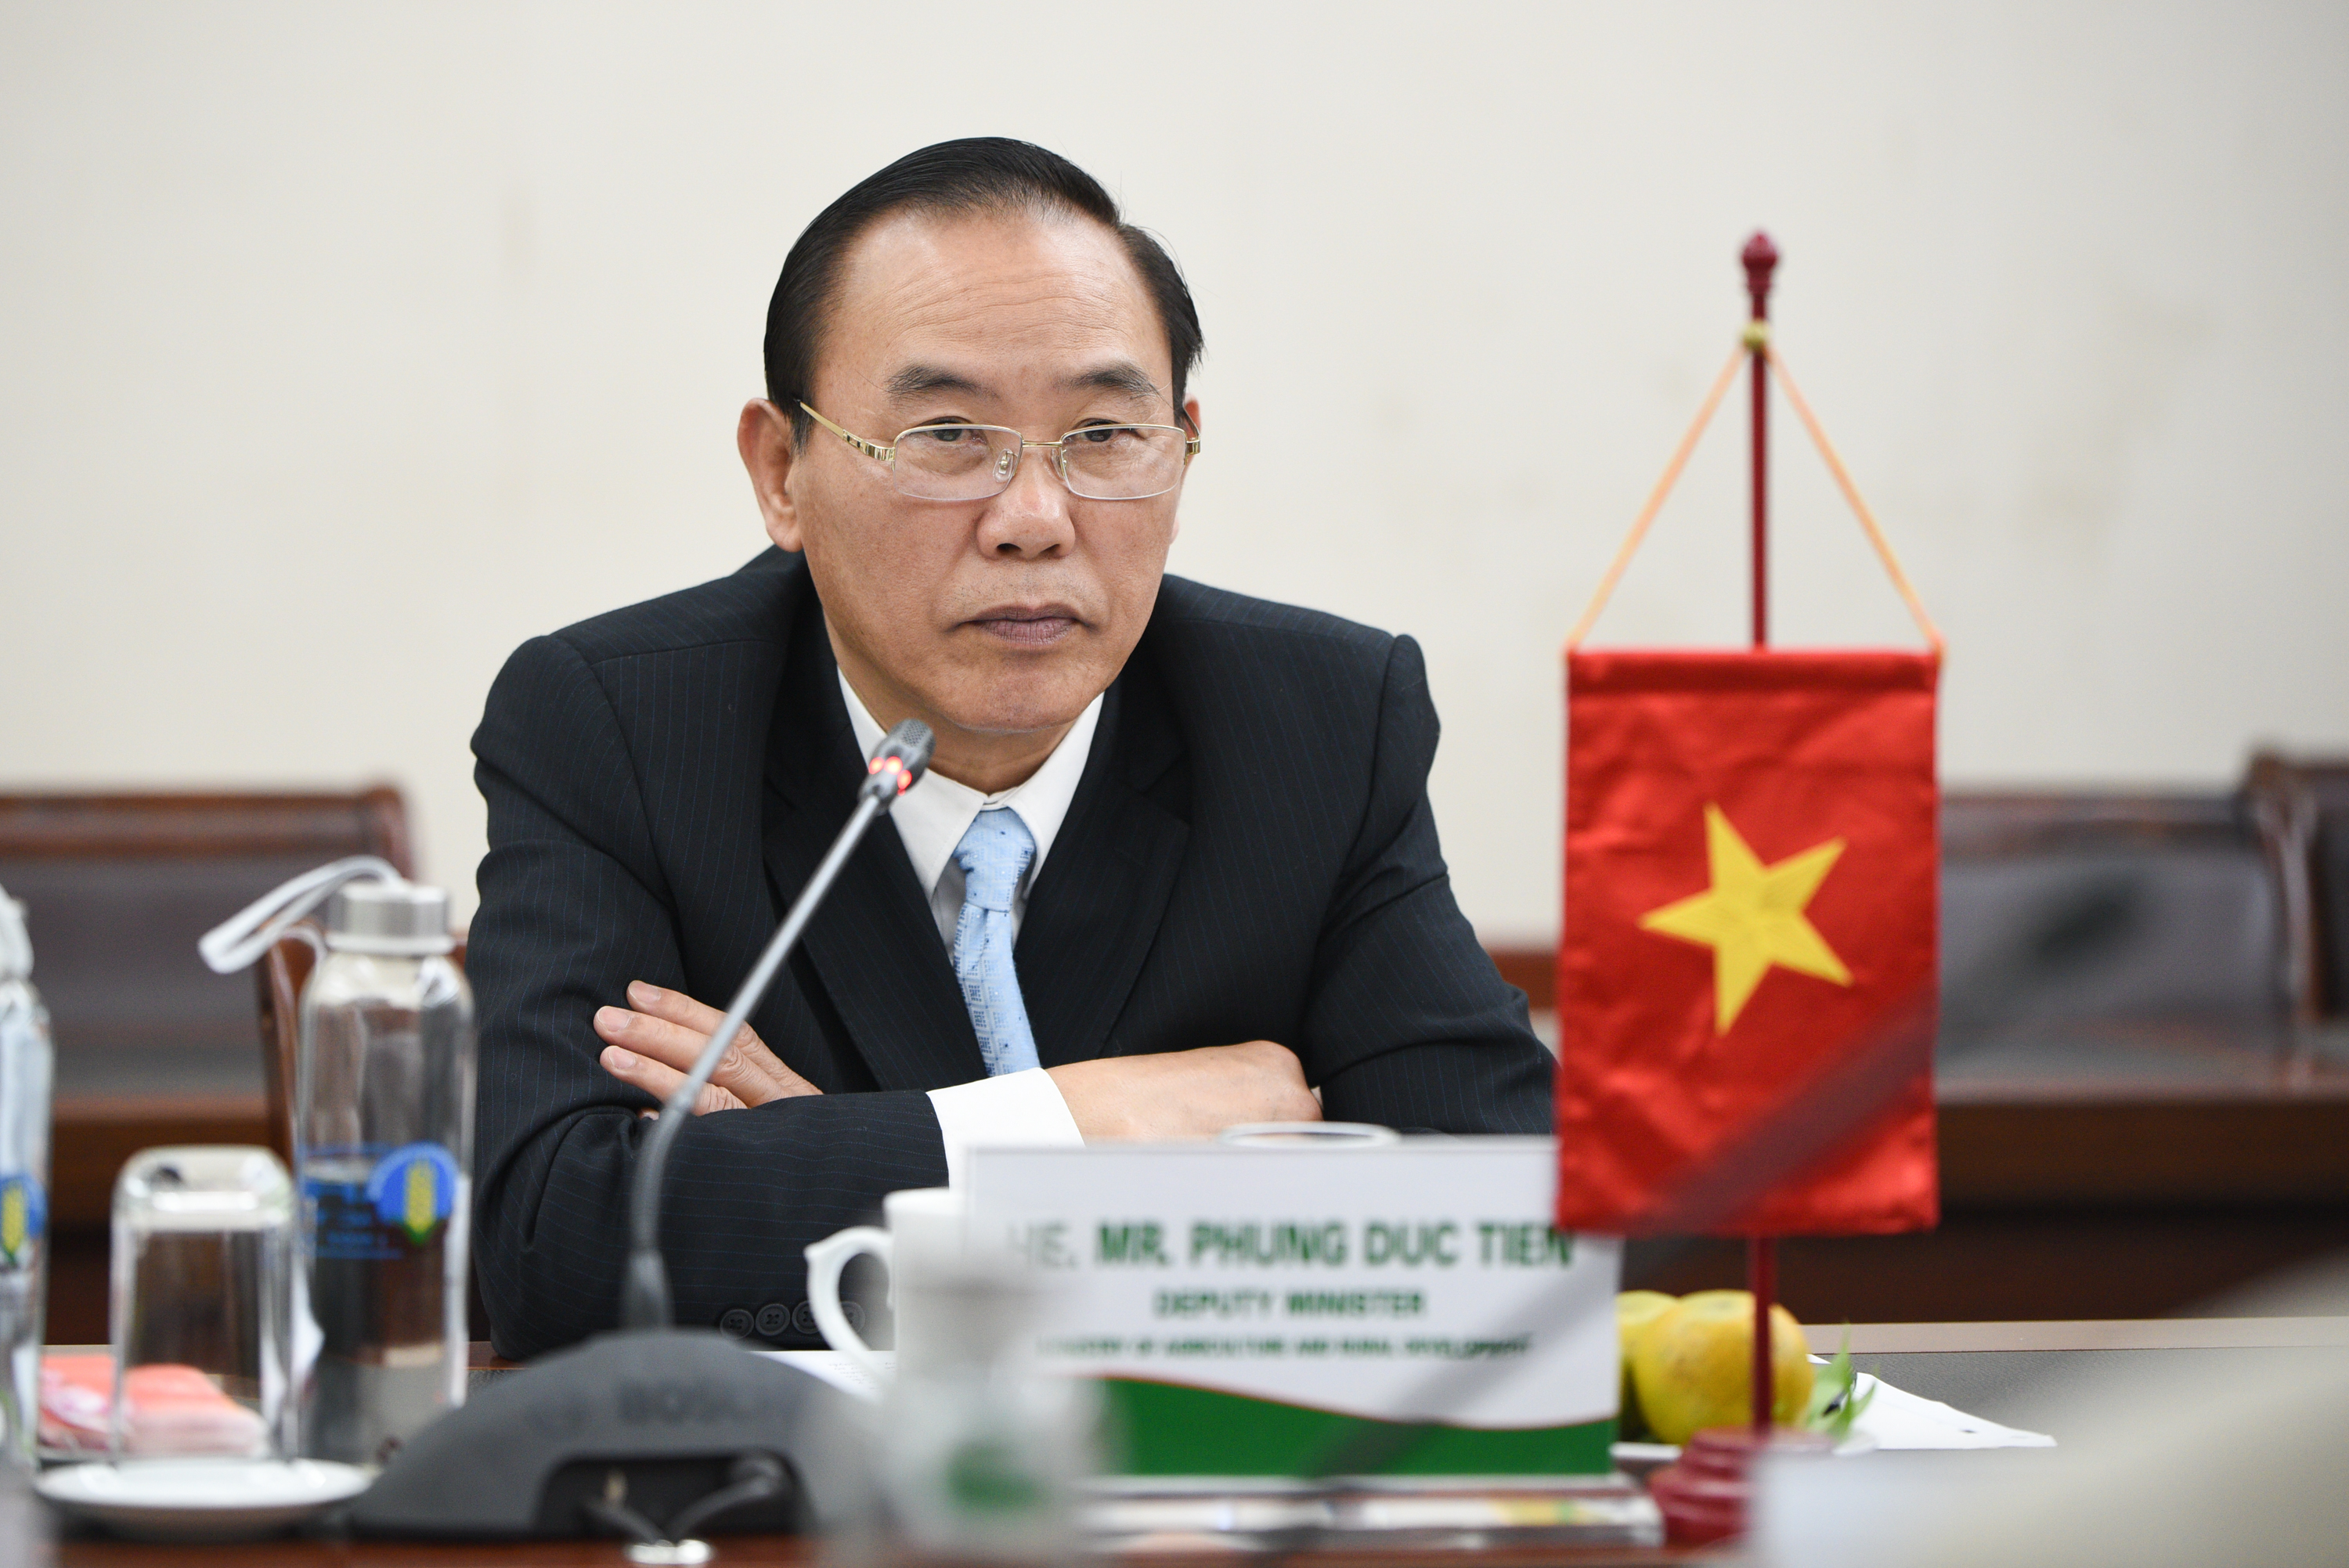 Deputy Minister Phung Duc Tien highly appreciated the participation of FOUR PAWS in the Vietnam One Health Partnership framework. Photo: Tung Dinh.